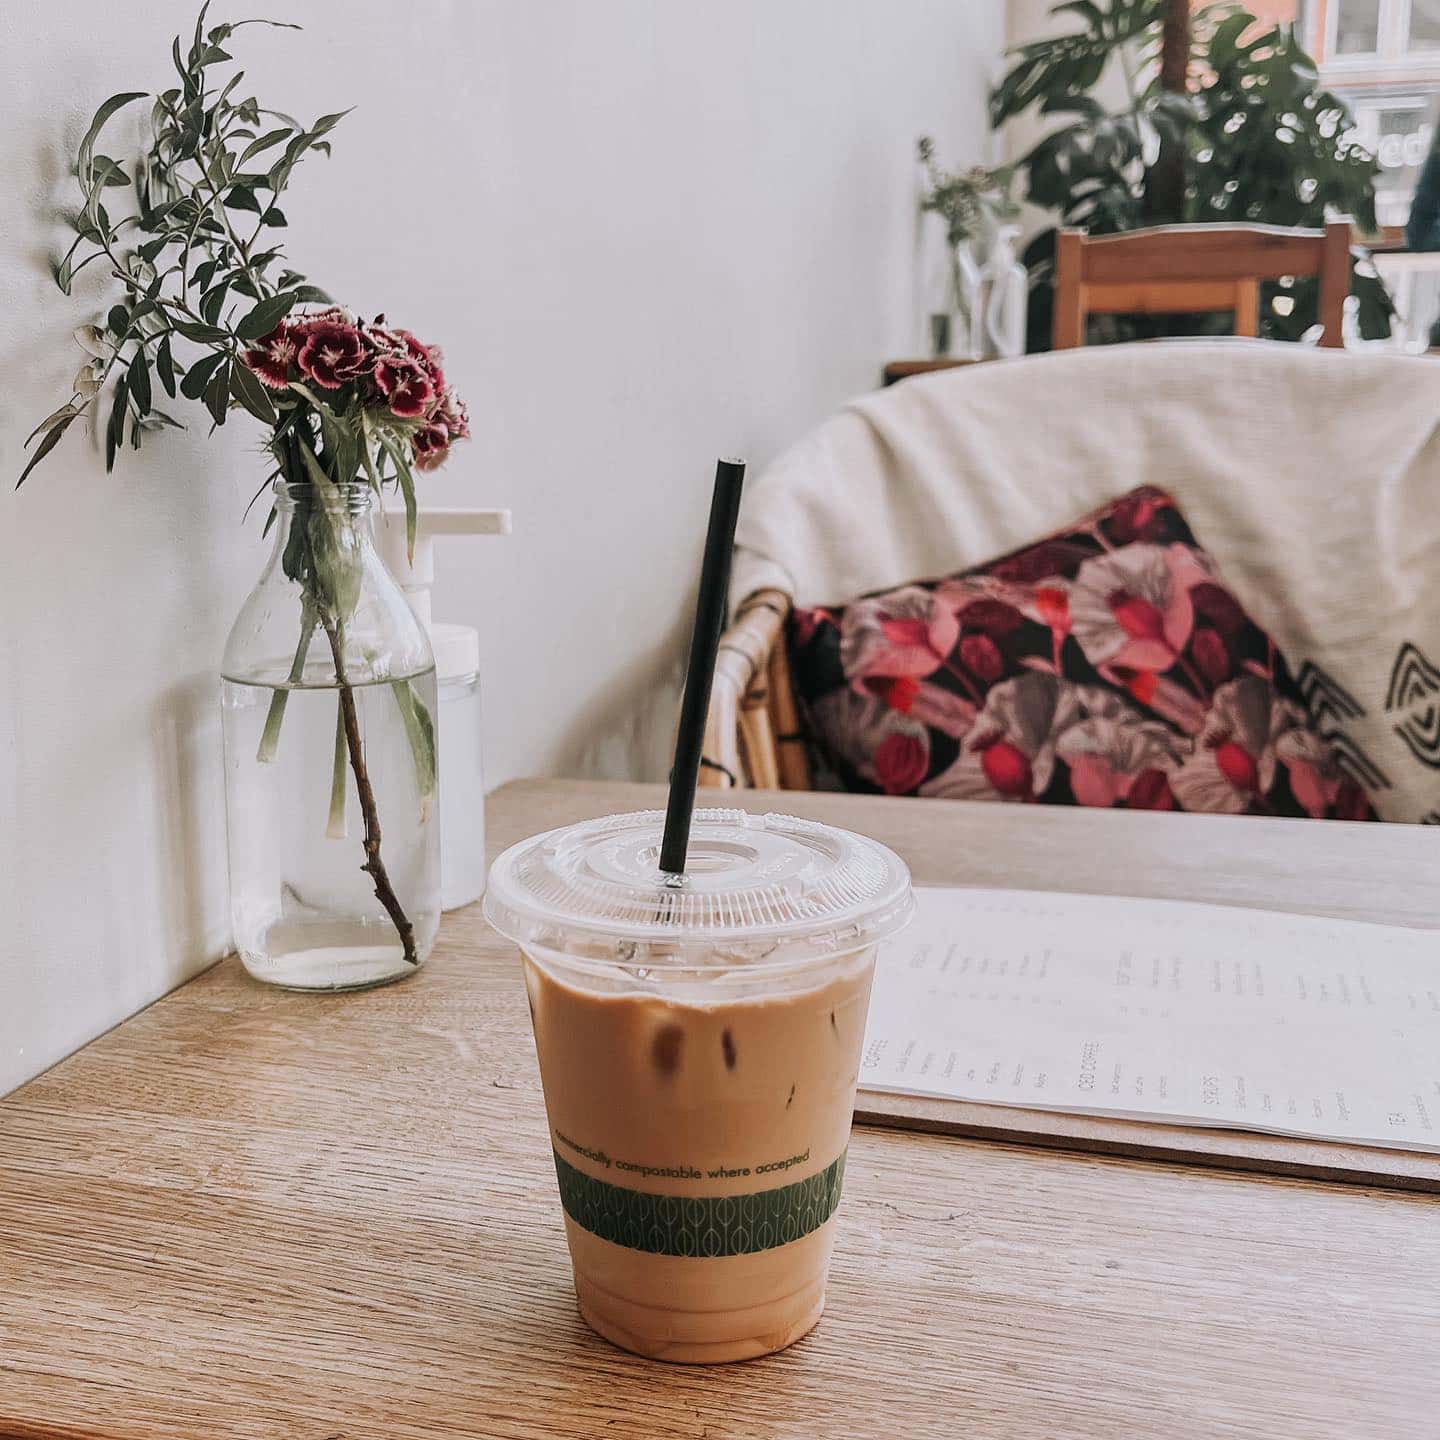 Have you seen that meme that says ‘My toxic trait is I think I need to buy an iced coffee every time I leave the house’ ? - this is me I am she 🧋 
⠀⠀⠀⠀⠀⠀⠀⠀⠀
#icedcoffee #monday #mondaymorning #cafe #heaton #northeastfood #newcastle #newcastleupontyne #livingnorth #nefoodbloggers #nebloggers #northeast #newcastlelifestyle #newcastlelife #newcastlefood #newcastlefoodblog #foodblogger  #newcastleeats #brunch  #northeasteats #mykindoftoon #northeastfood #northeastfoodblogger #lifestyle #lifestyleblogger #lovenewcastle #Newcastleblogger